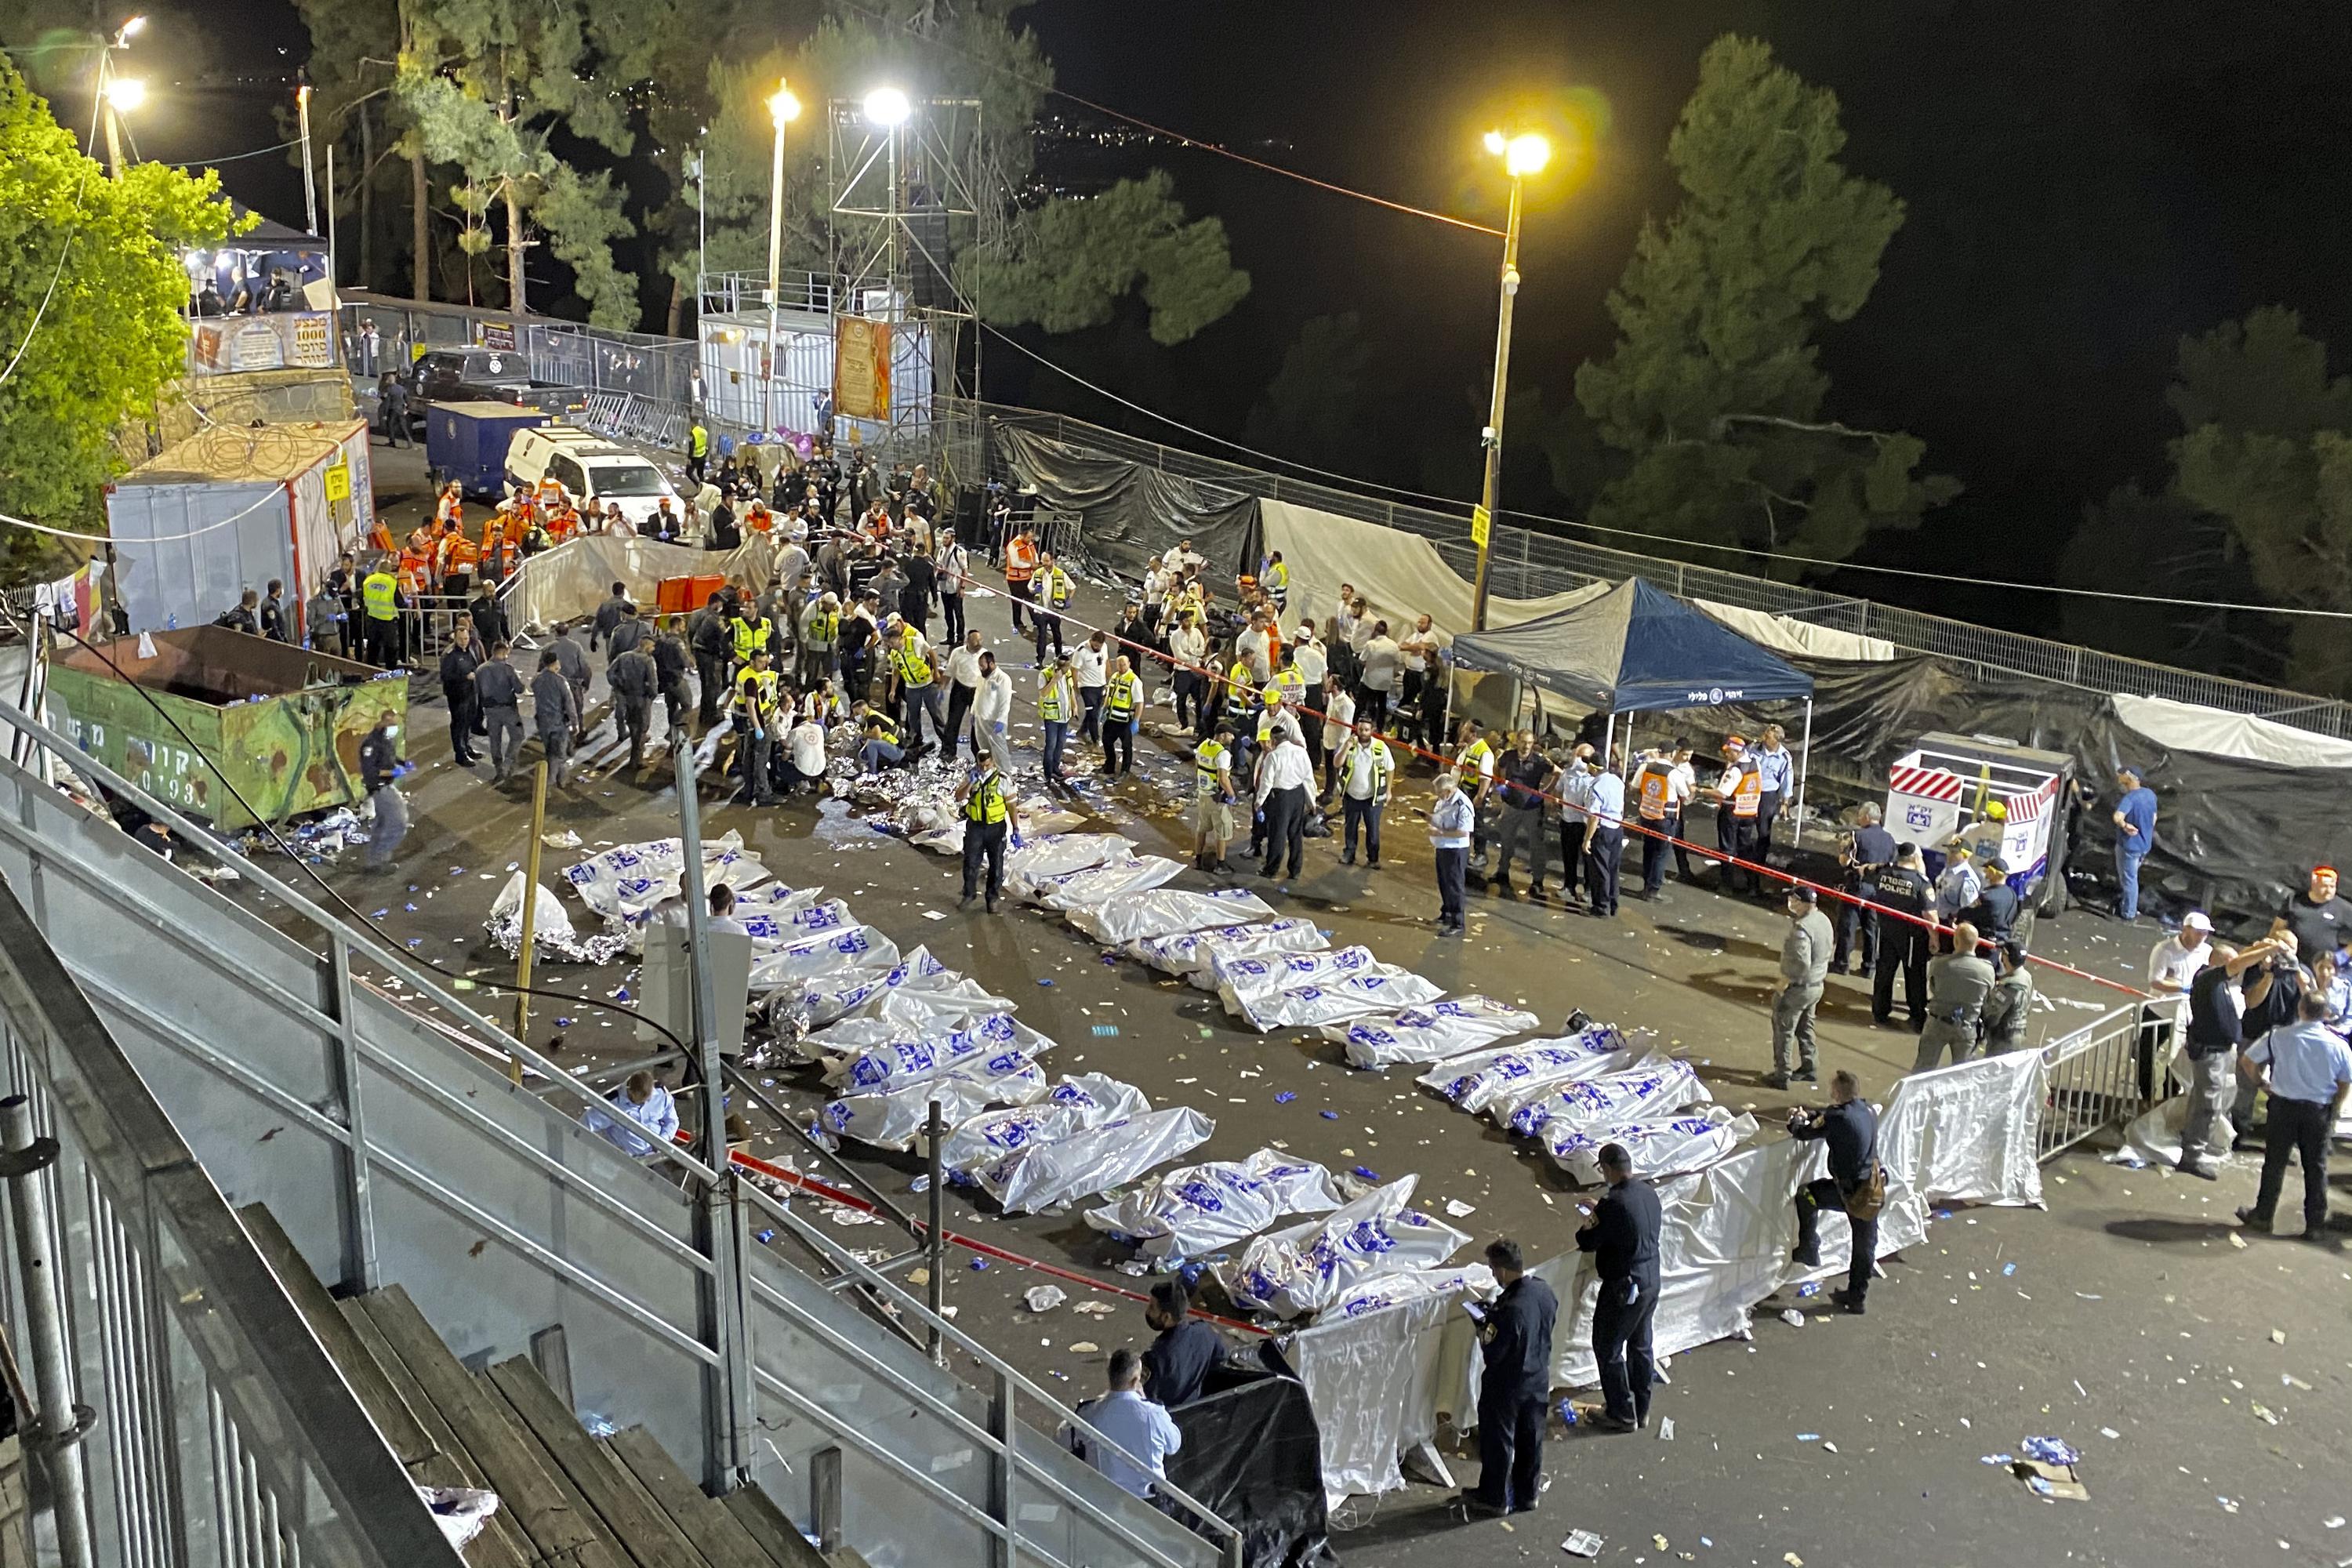 Religious festival stampede in Israel kills 44, hurts dozens - The Associated Press